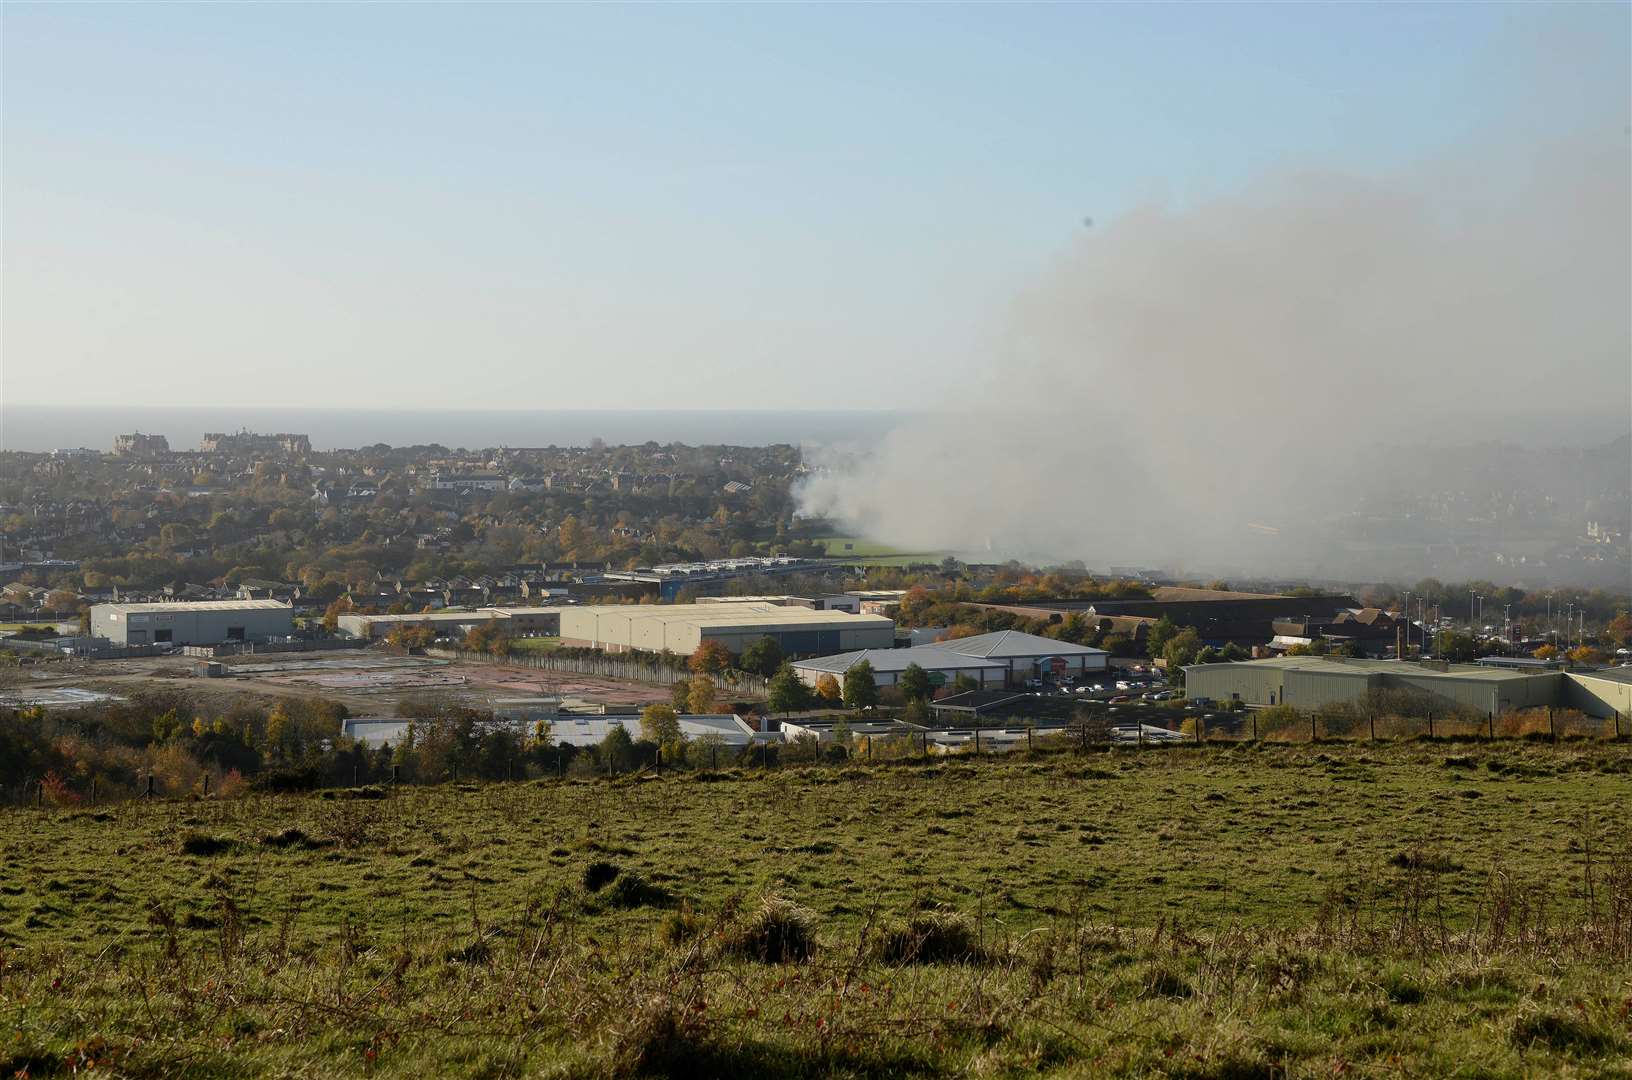 Smoke coming from the fire at Folkestone Morrisons in 2018, as seen from Sugar Loaf Hill. Picture: Paul Amos